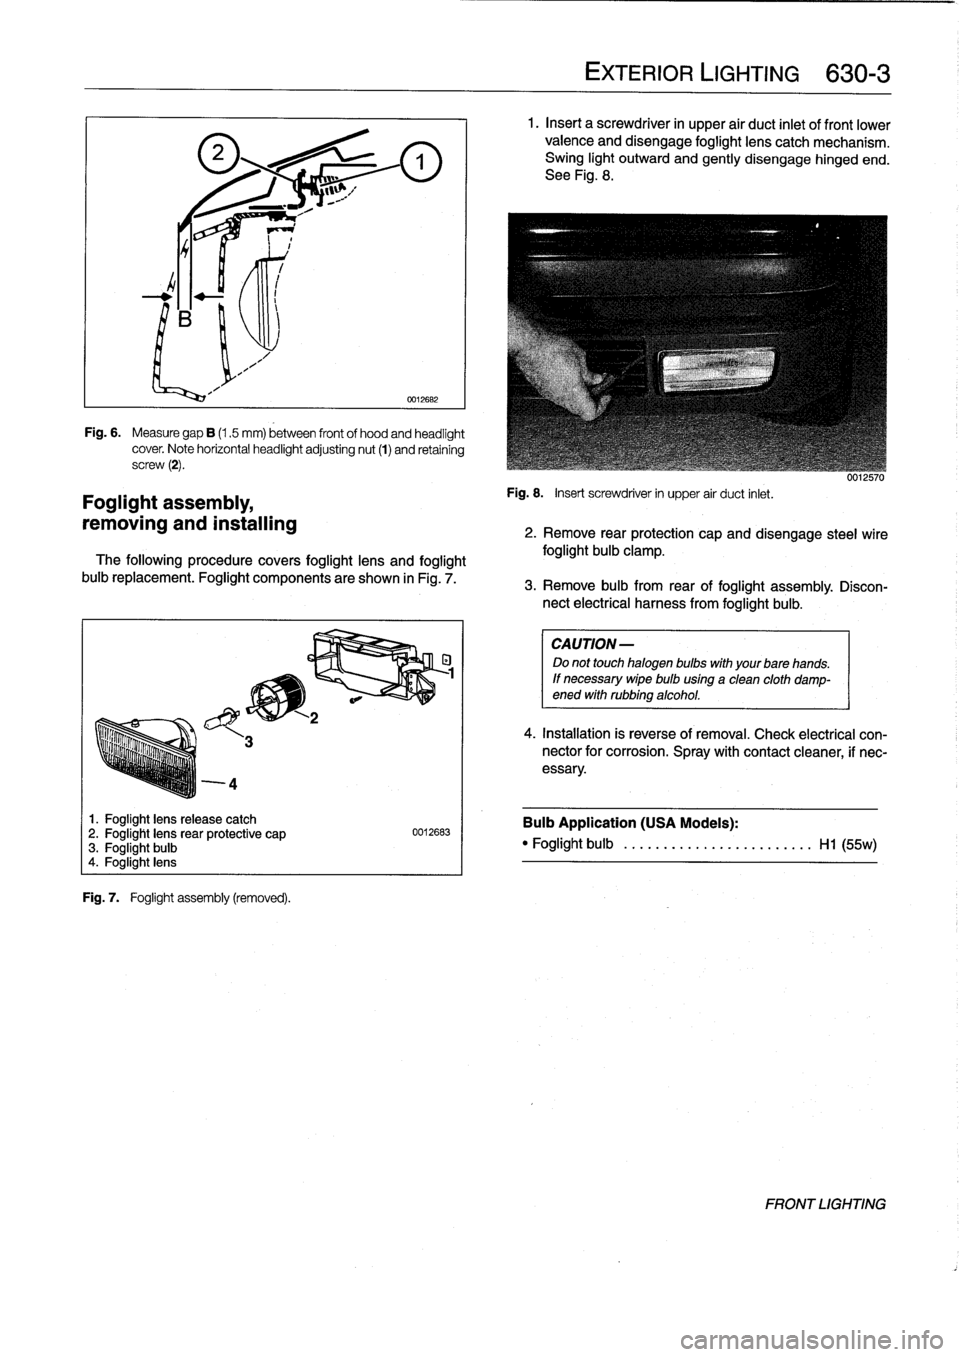 BMW M3 1996 E36 Workshop Manual 4

Foglight
assembly,

removing
and
installing

1
.
Foglight
lens
release
catch
2
.
Foglight
lensrear
protective
cap
3
.
Foglight
bulb
4
.
Foglight
lens

Fig
.
7
.

	

Foglight
assembly
(removed)
.

0